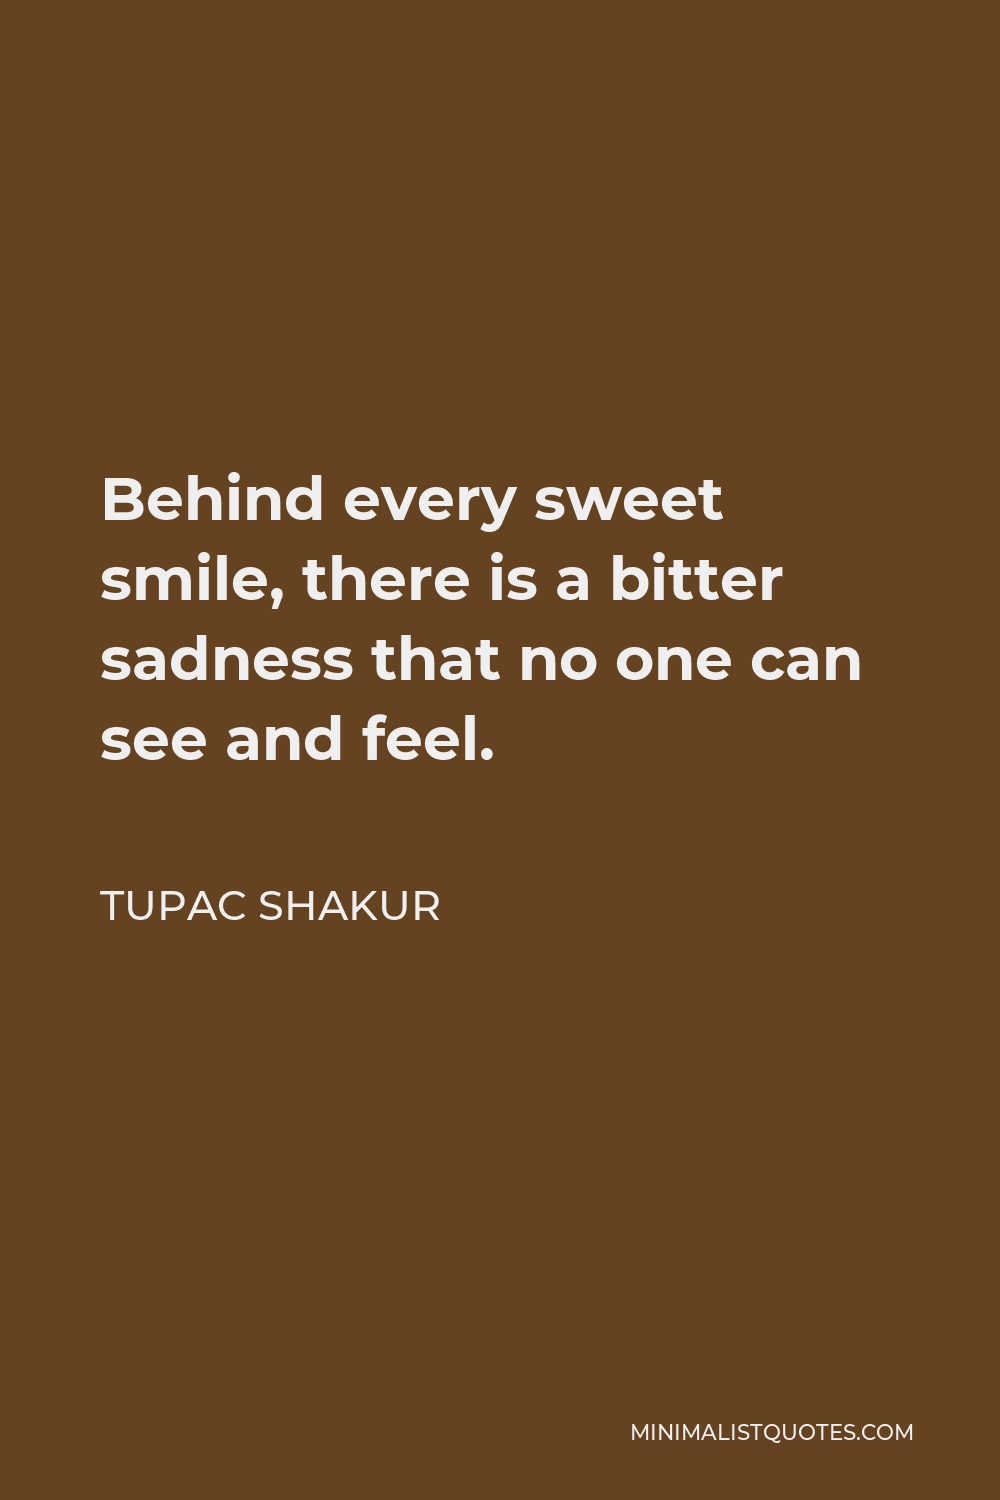 Tupac Shakur Quote - Behind every sweet smile, there is a bitter sadness that no one can see and feel.